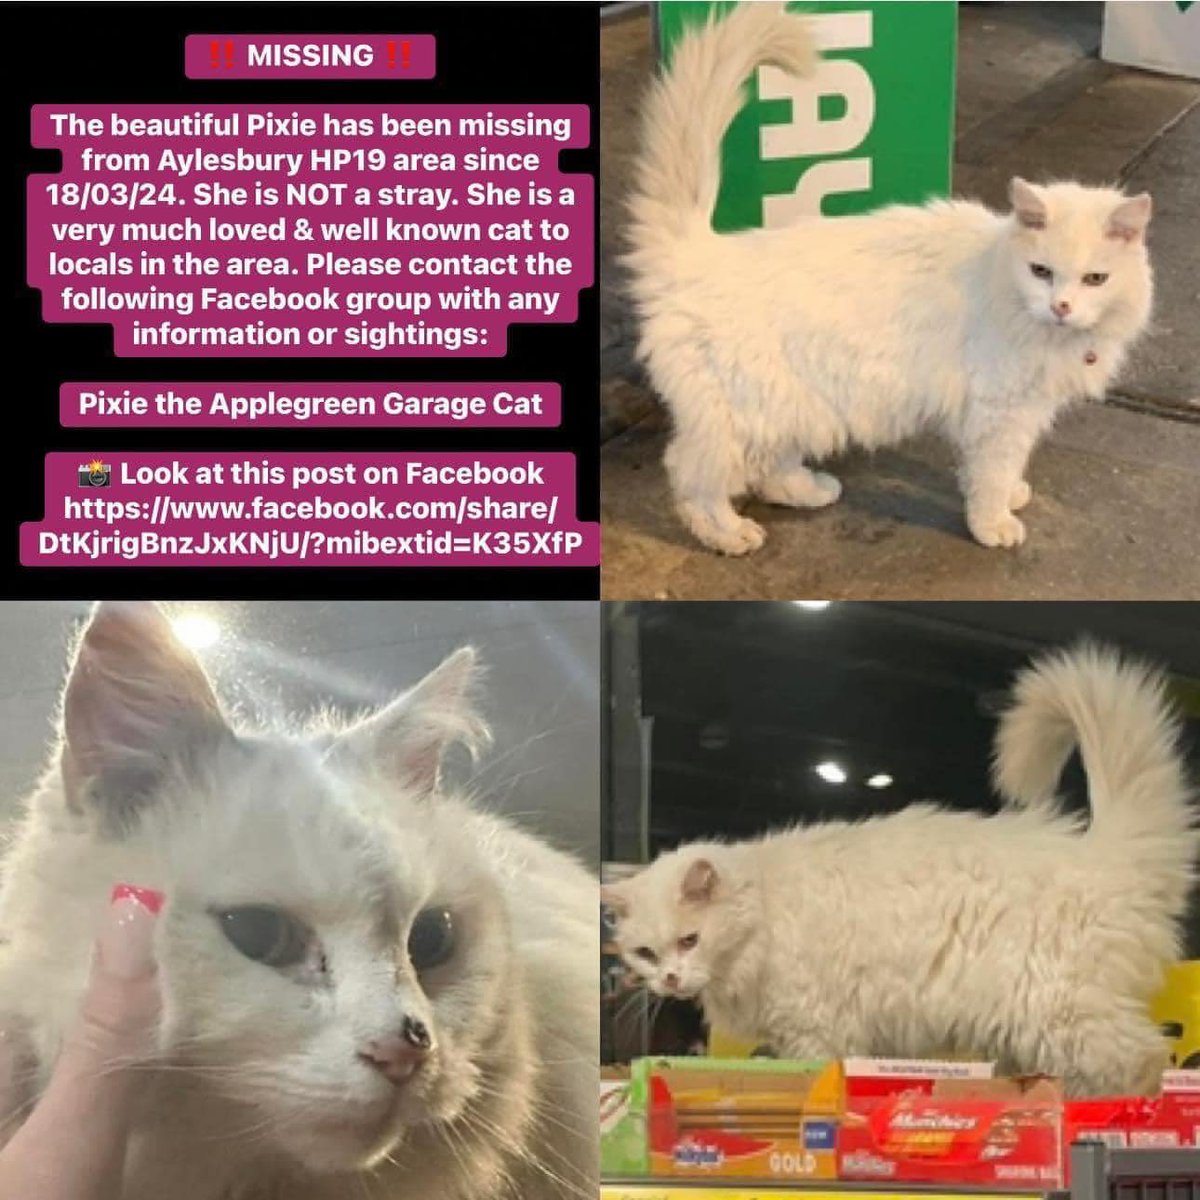 Pixie’s a well known Aylesbury resident with her own Facebook group. She may have been taken by someone who believed she was homeless. If you know anything about her, 🙏 let us know or get in touch with her owners via her group Thank you #MissingCats #CatsOfTwitter #CatsOfX